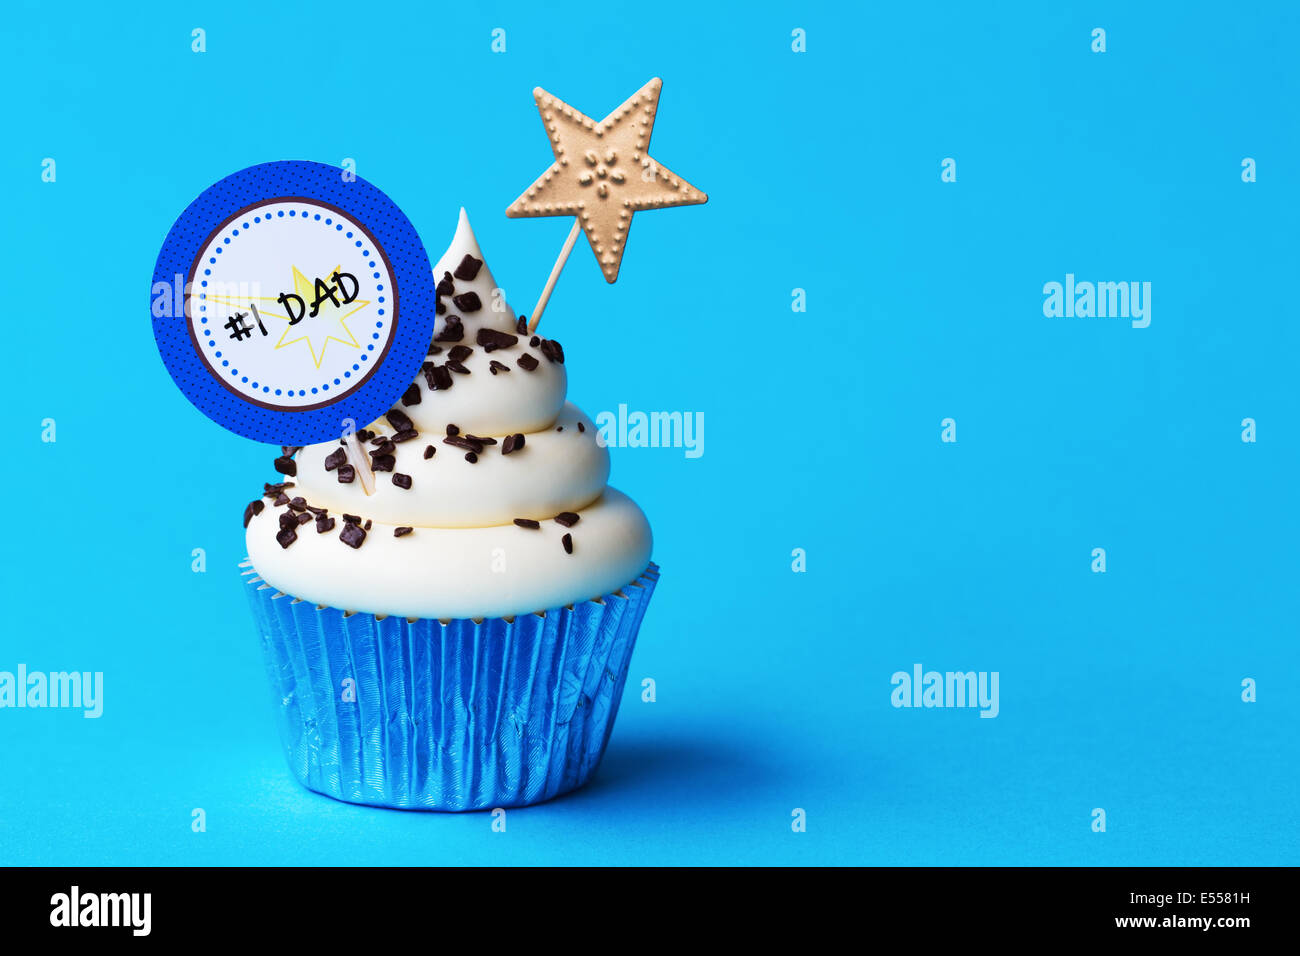 Cupcake for Father's day Stock Photo